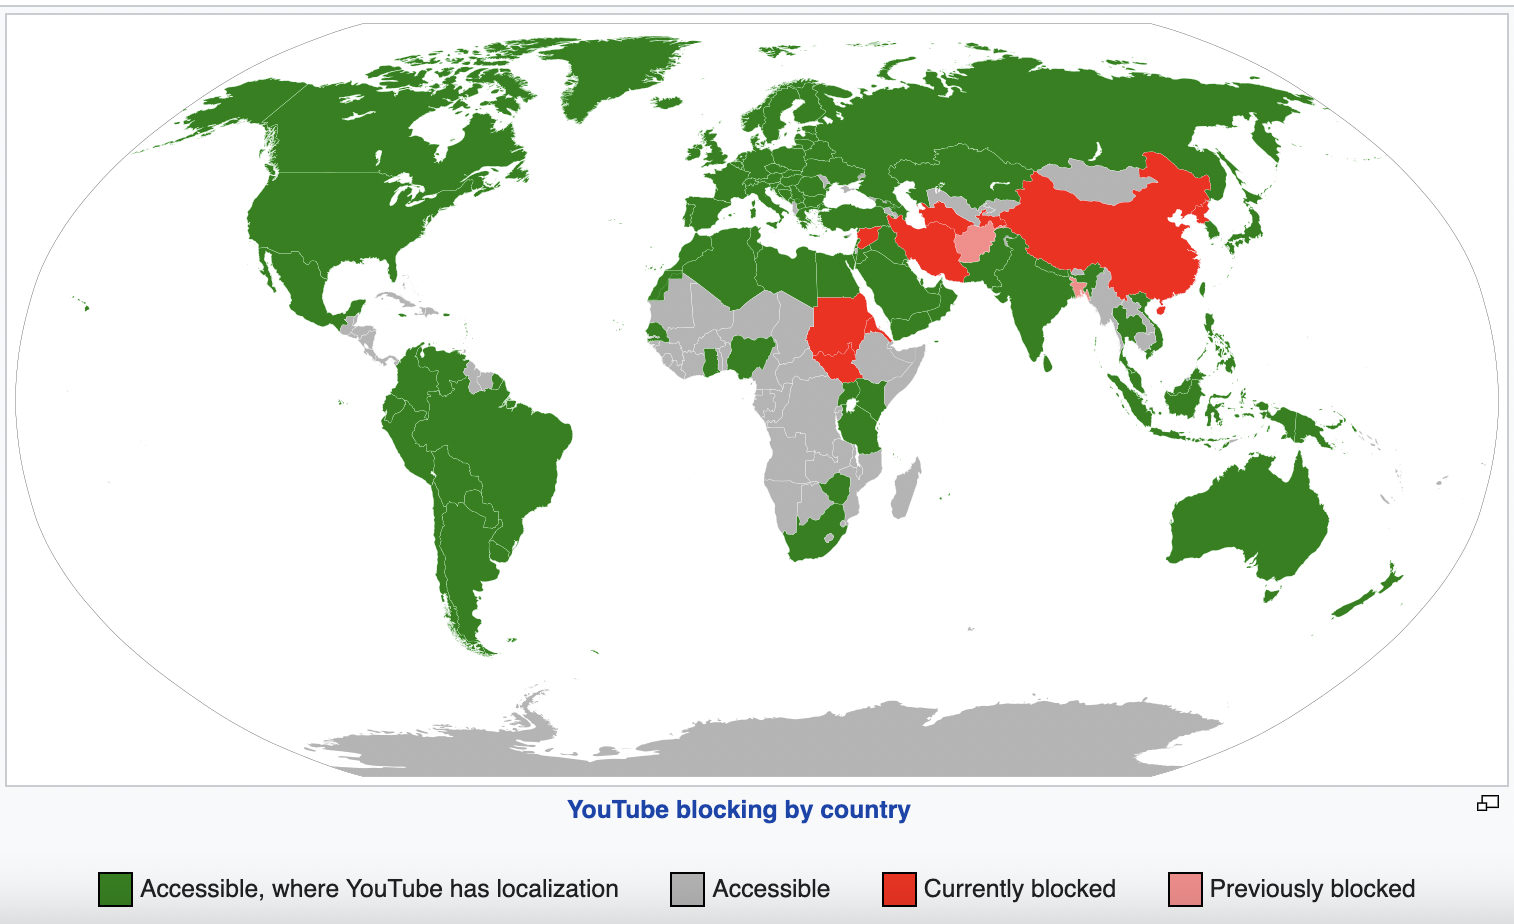 The image shows youtube blocking by countries. 